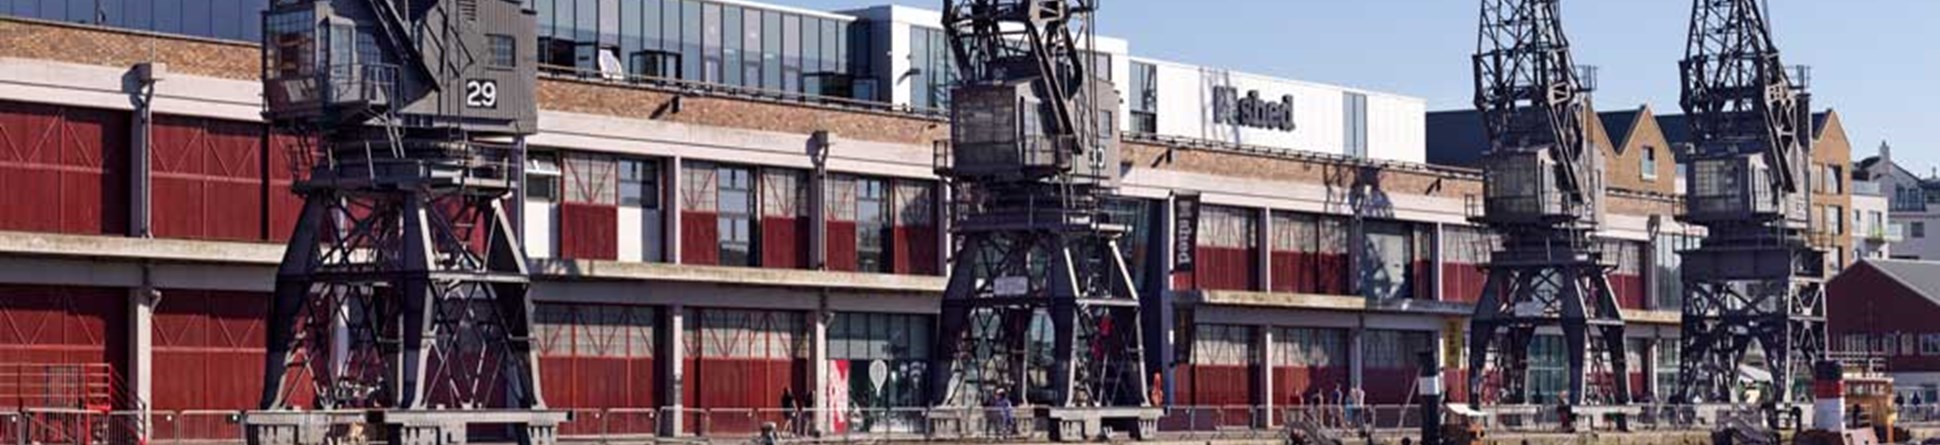 A photograph of four large, grey, 20th century cranes on a wharf with a long industrial building behind them.